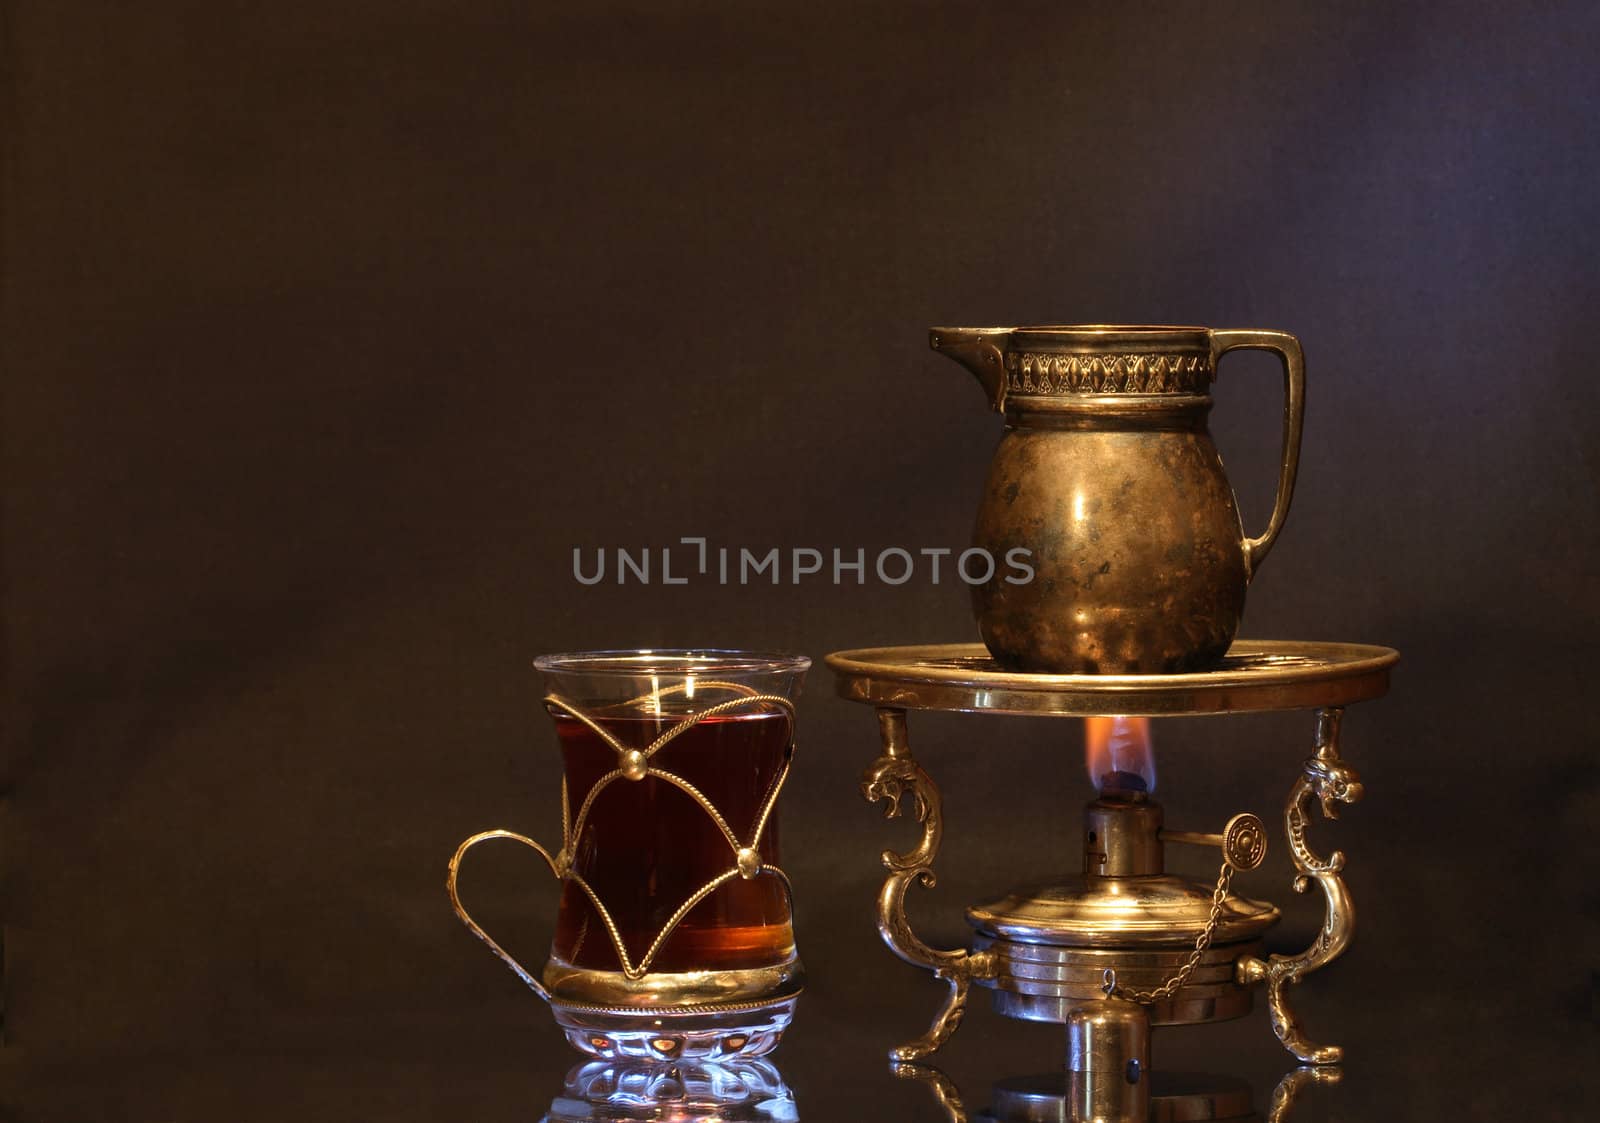 Cup of tea near ancient brass jug standing on vintage table spirit lamp with flame